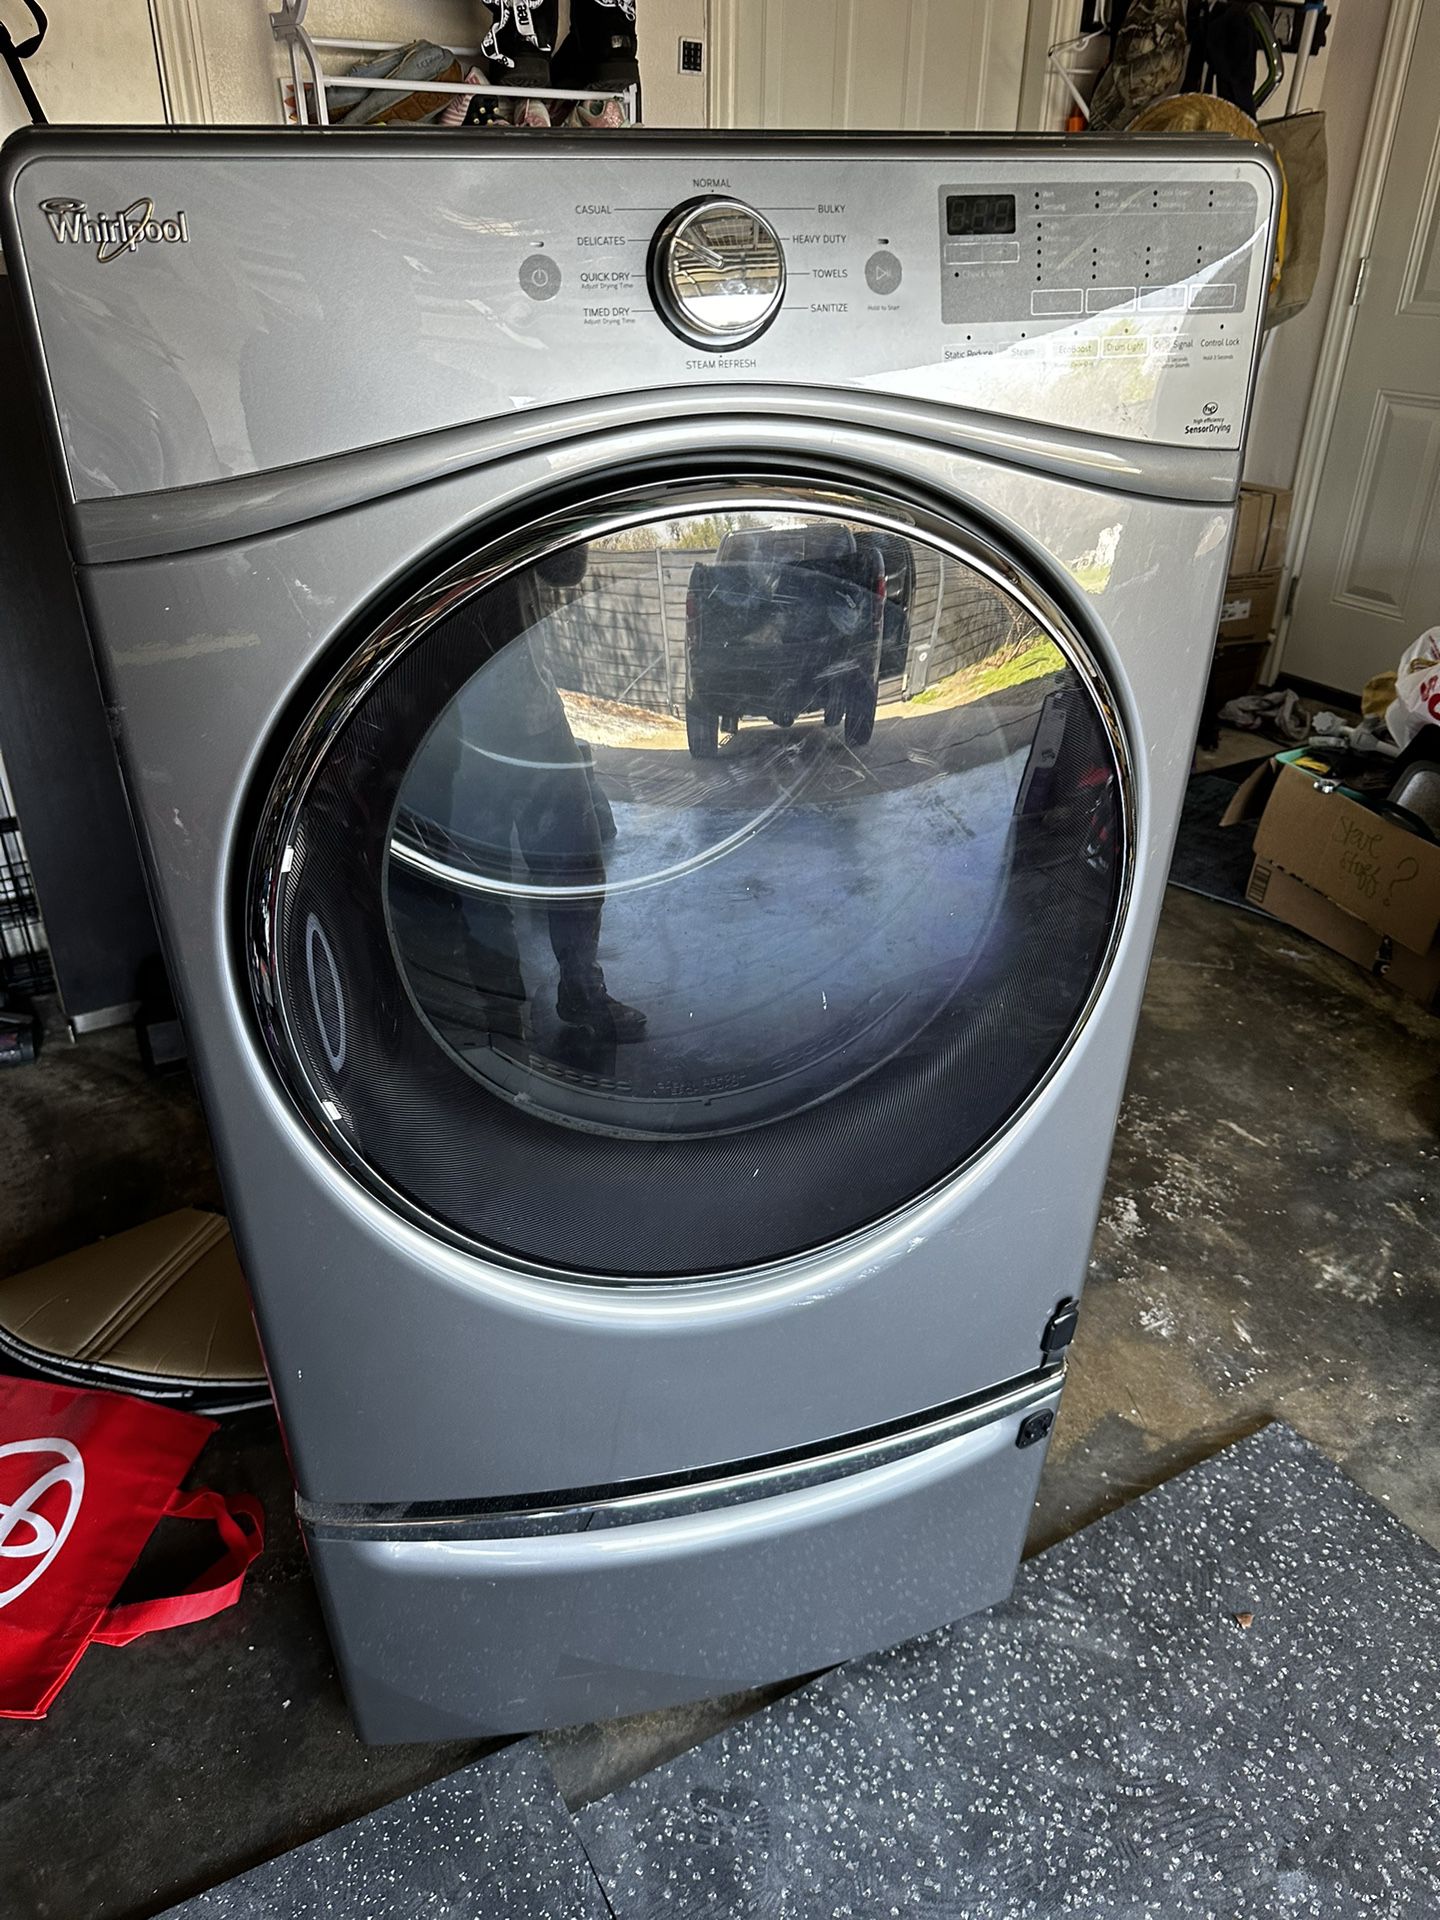 Whirlpool Dryer (clothes Dryer)